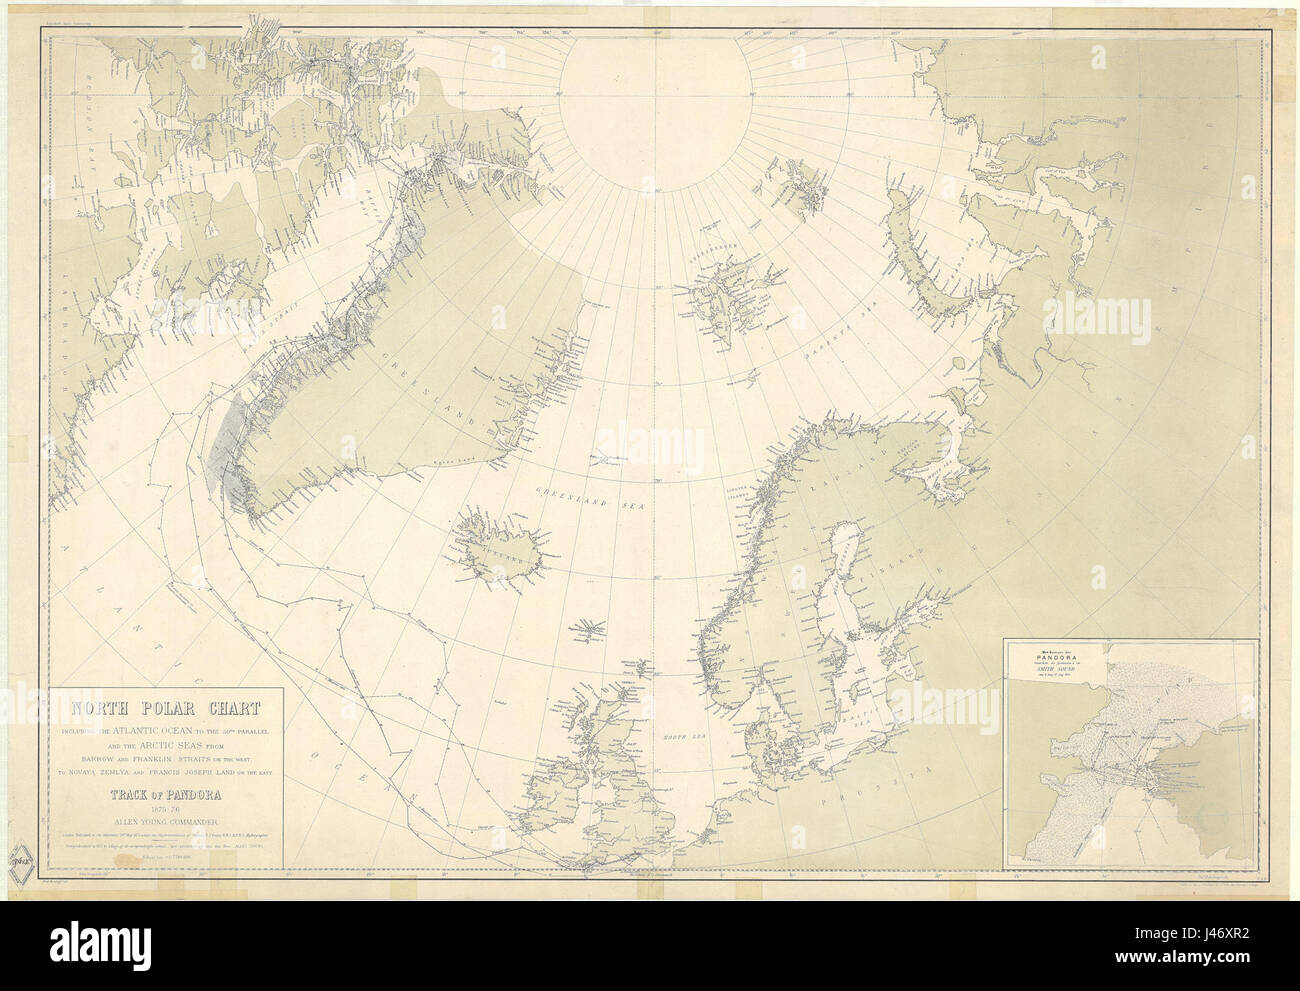 North Polar Chart, including the Atlantic Ocean to the 50th Parallel and the Arctic Seas from Barrow and Franklin Straits on the West, to Novaya Zemlya and Francis Joseph Land on the East   UvA BC OTM HB KZL 65 03 24 Stock Photo